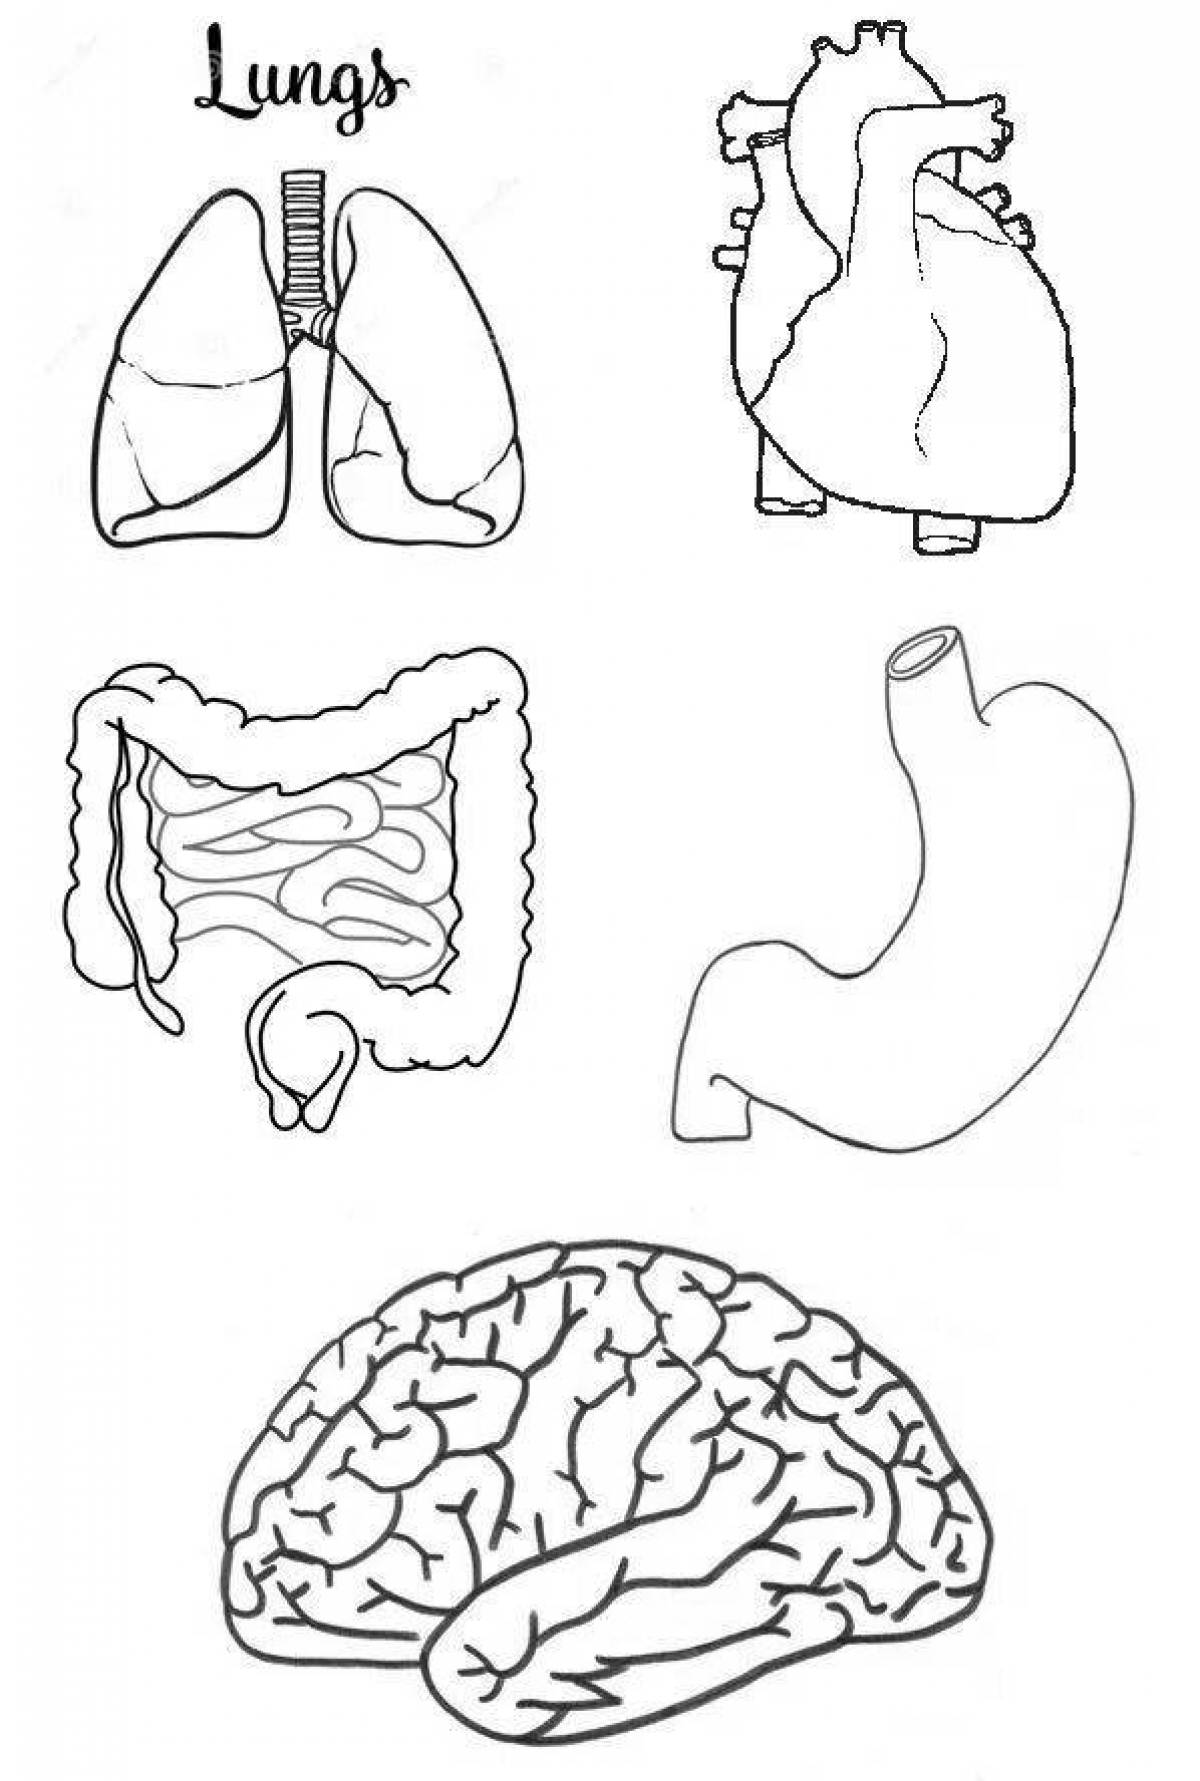 Creative coloring of human organs for children